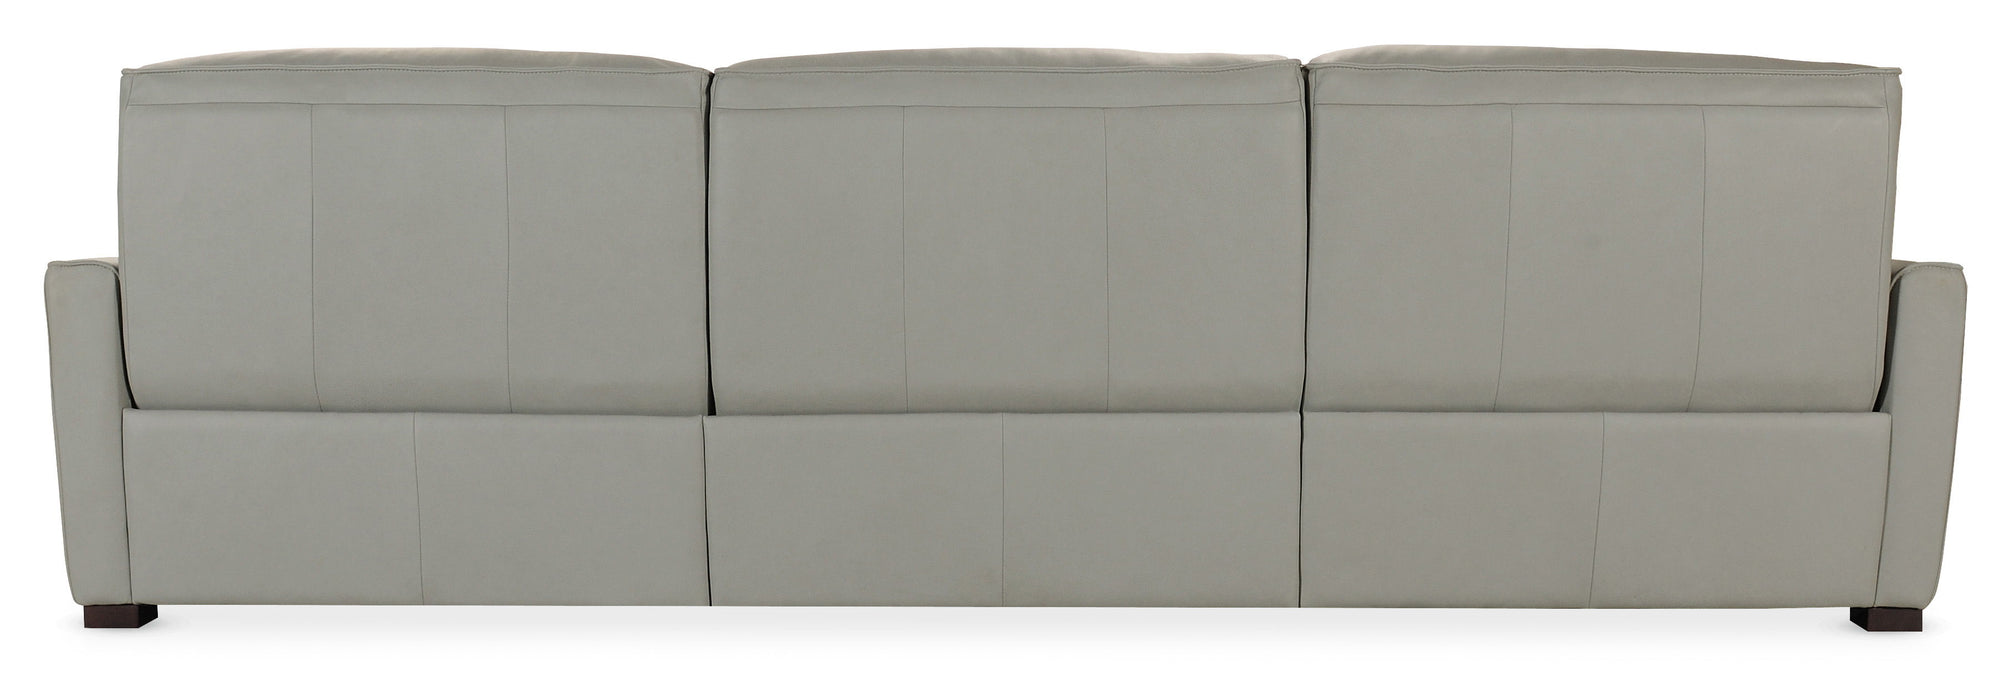 Reaux - Power Reclining Sectional